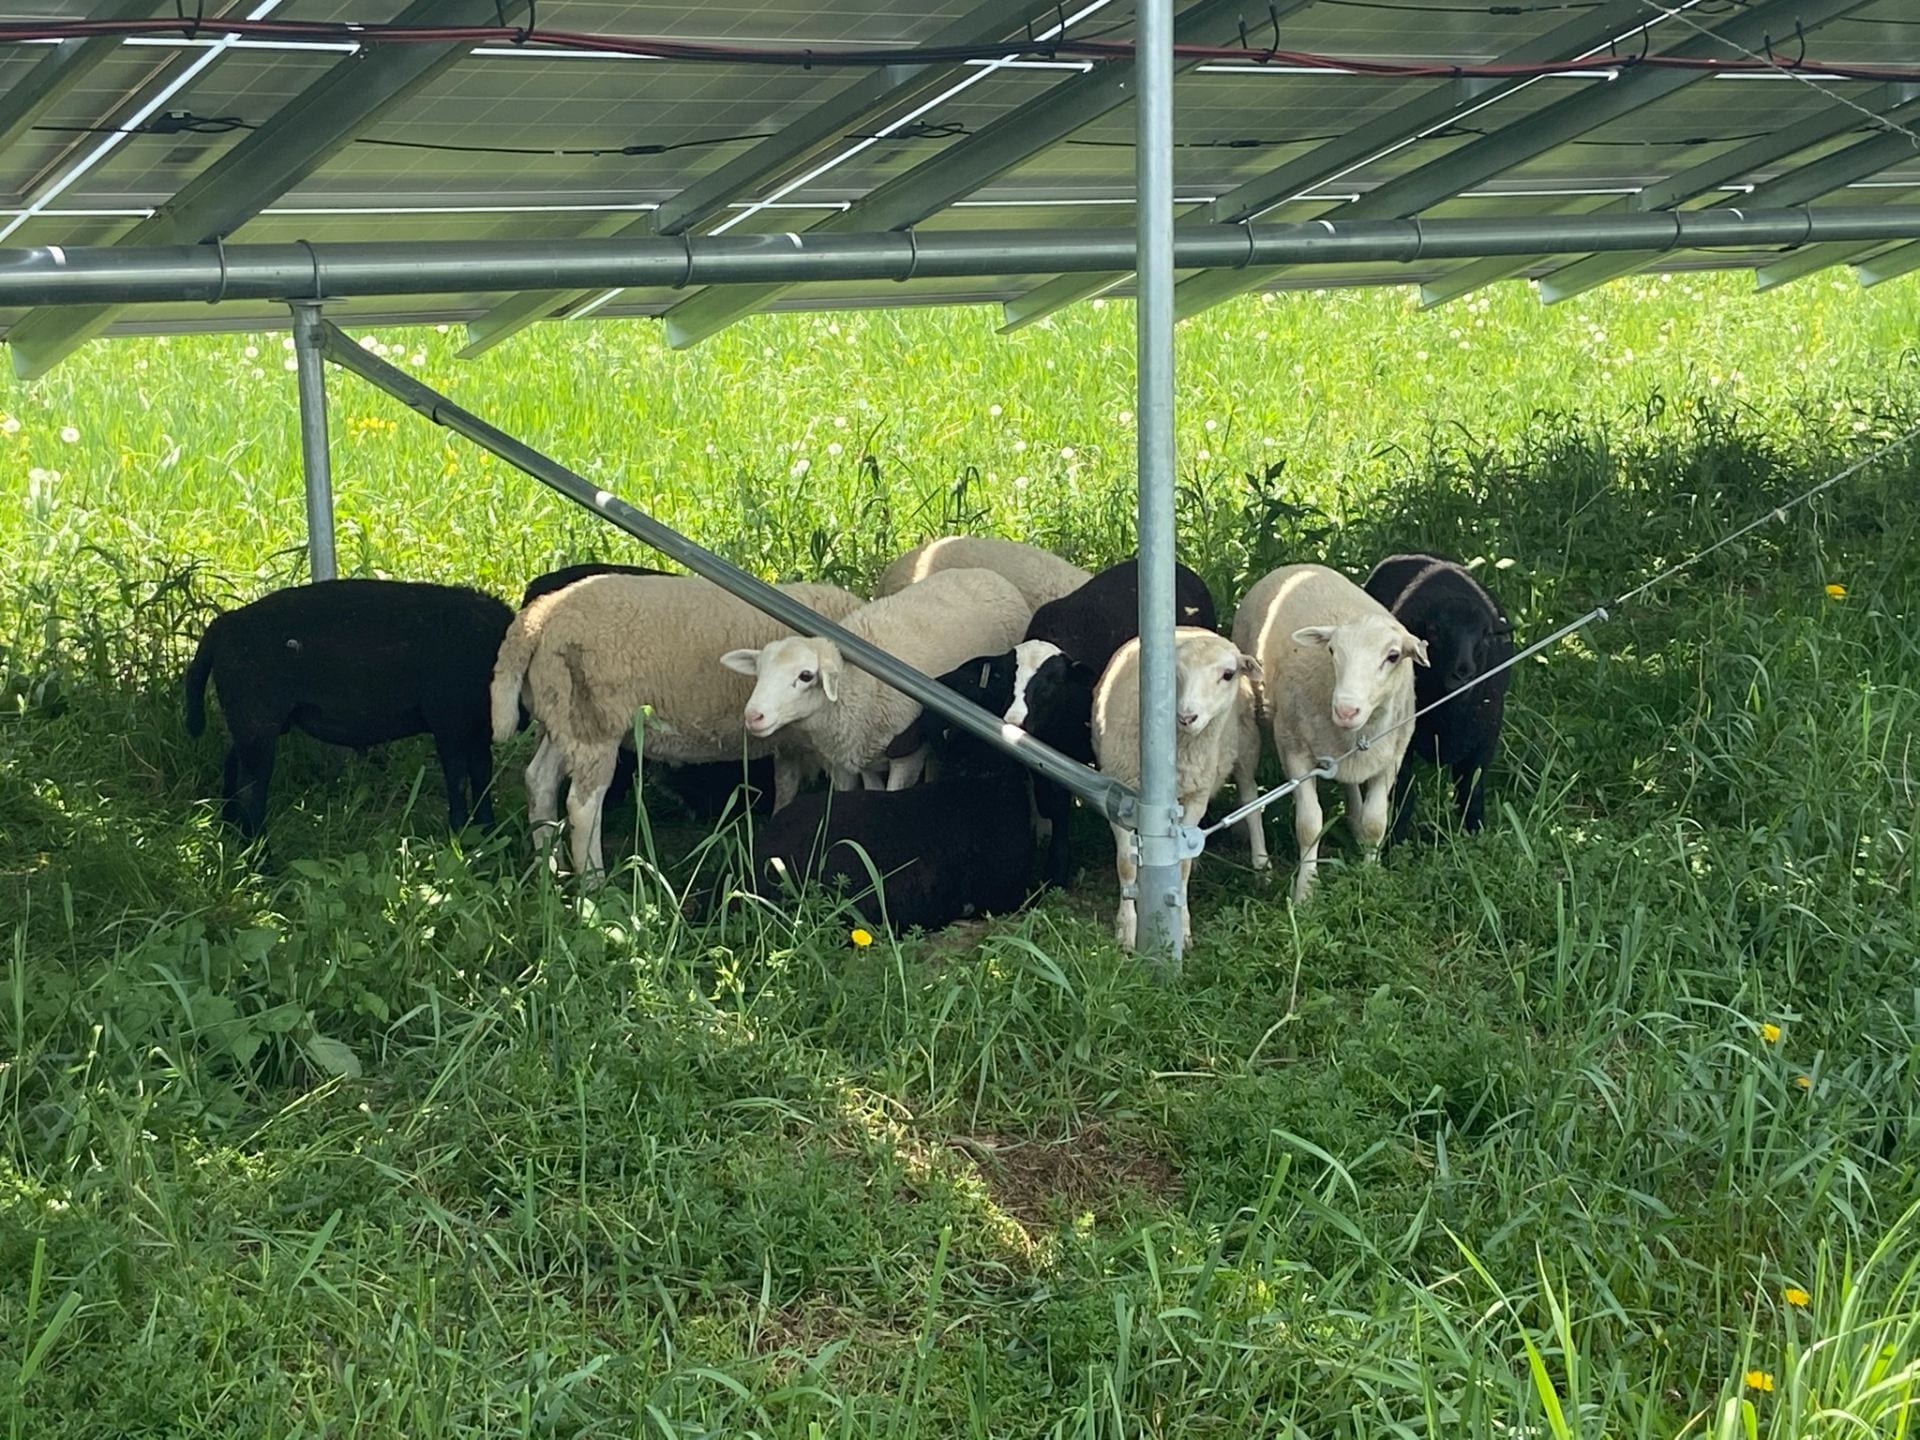 Sheep take a break from munching on vegetation at the Nittany 1 solar array in Pennsylvania. Credit: Penn State MCOR